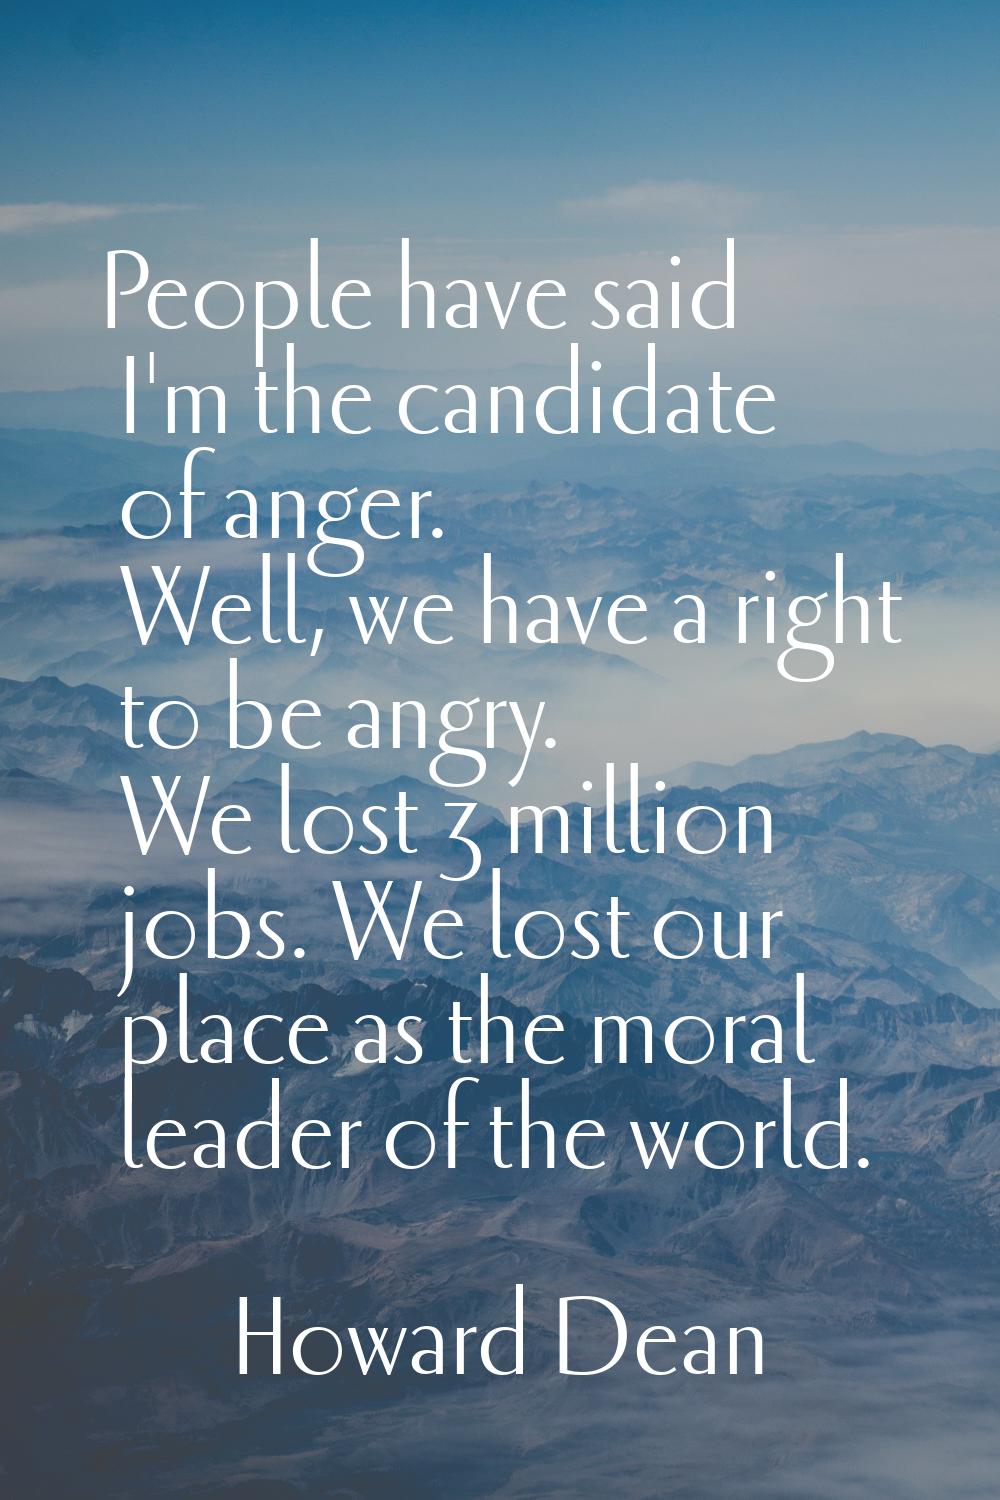 People have said I'm the candidate of anger. Well, we have a right to be angry. We lost 3 million j